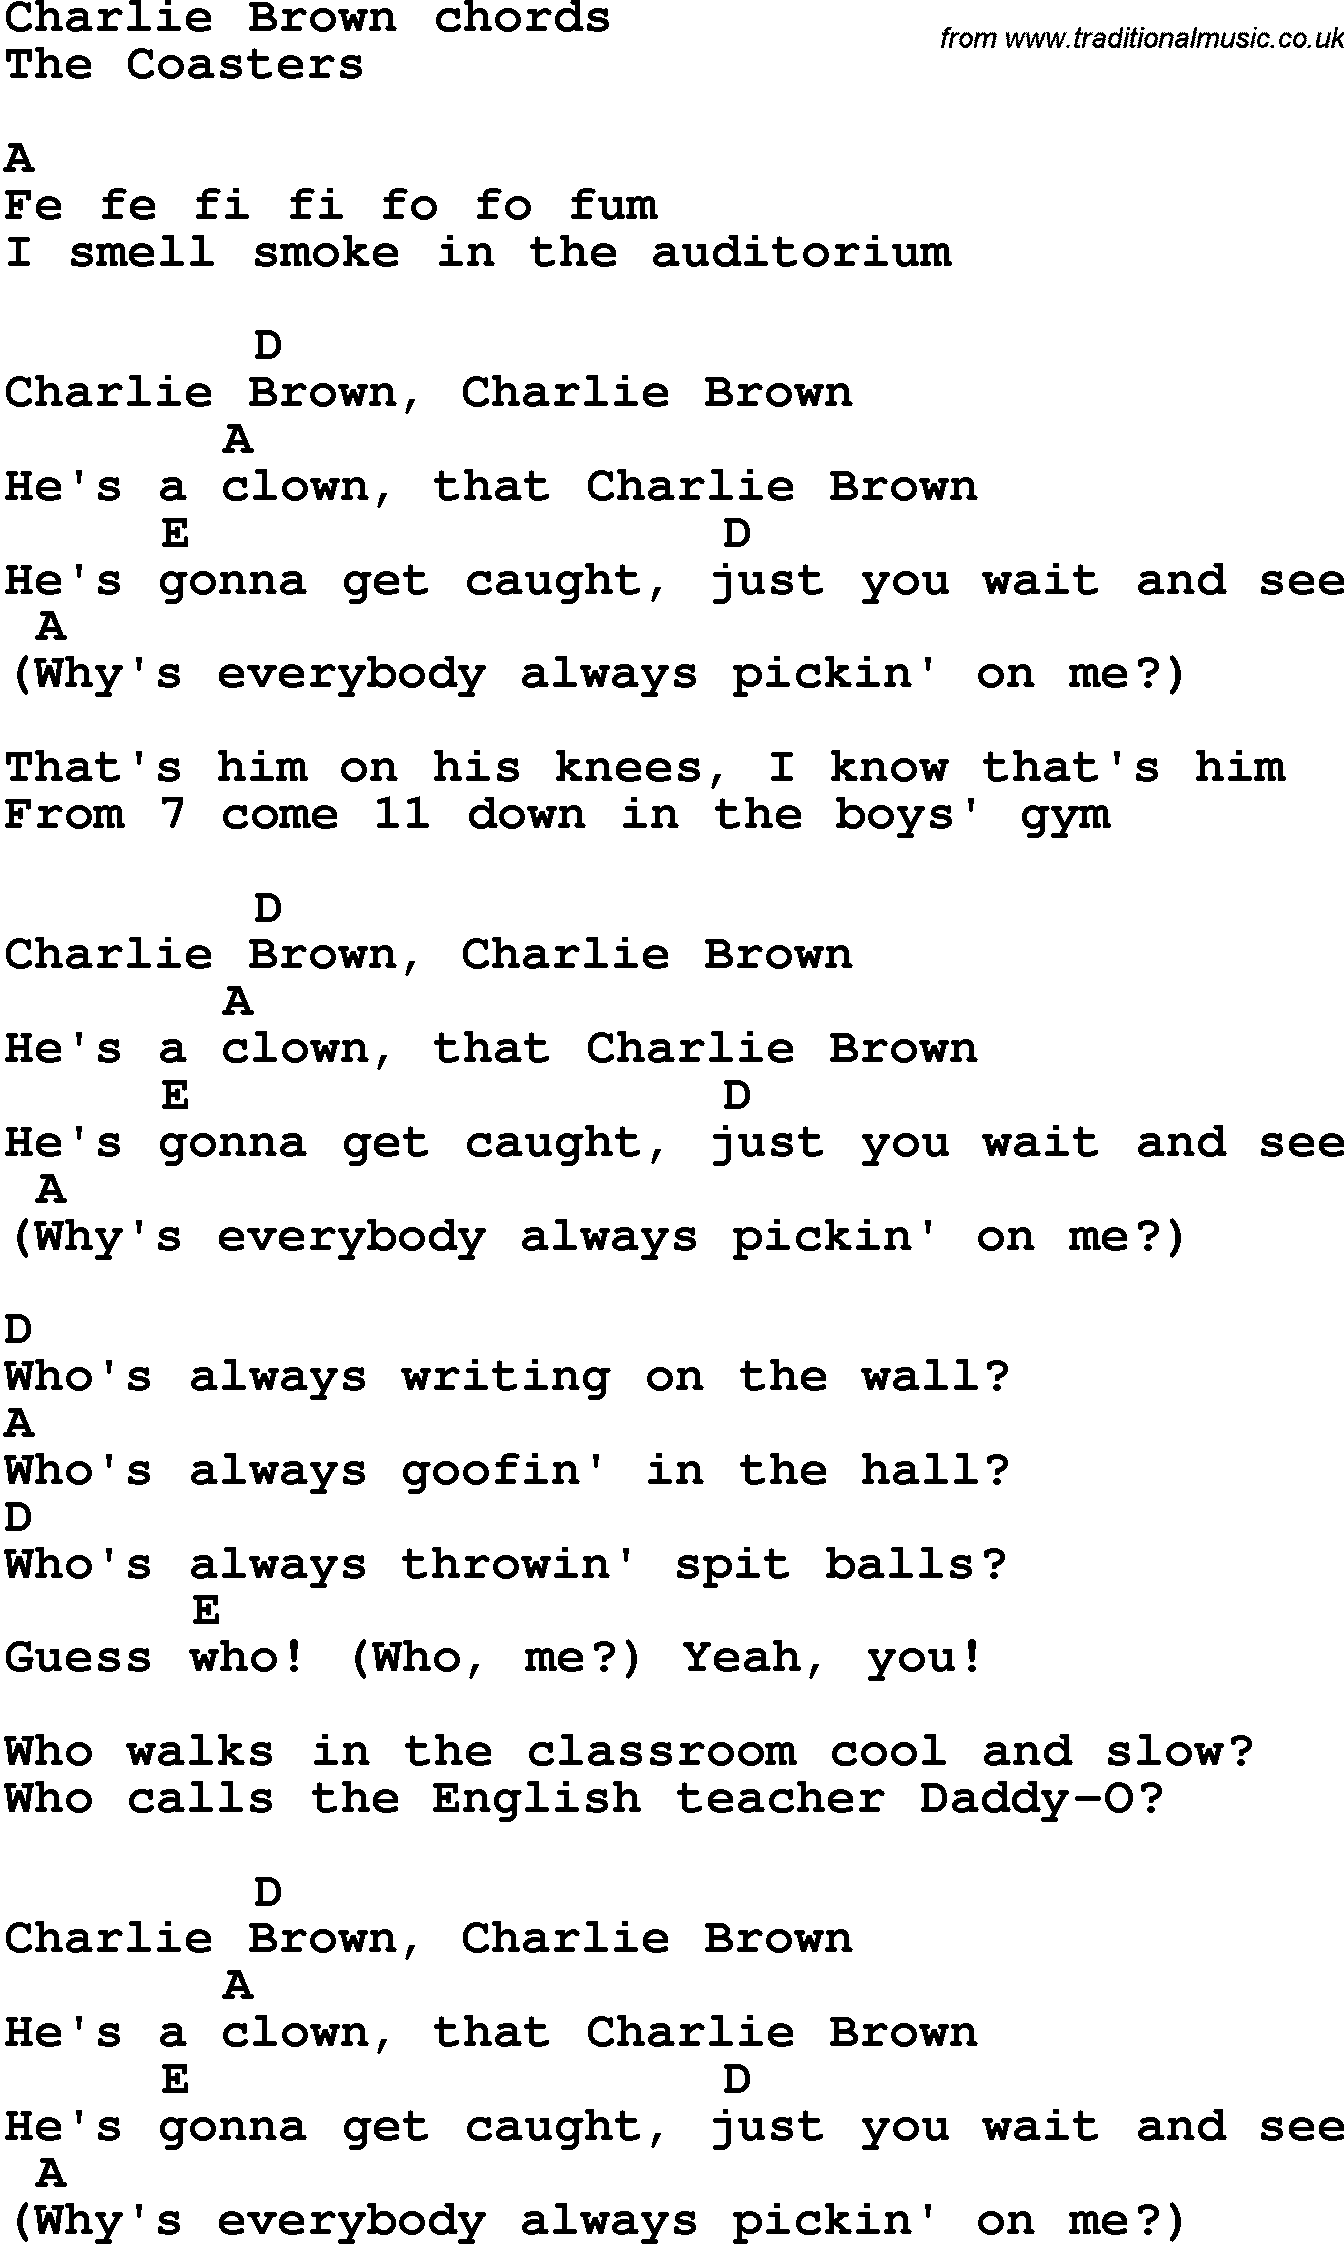 Song Lyrics with guitar chords for Charlie Brown